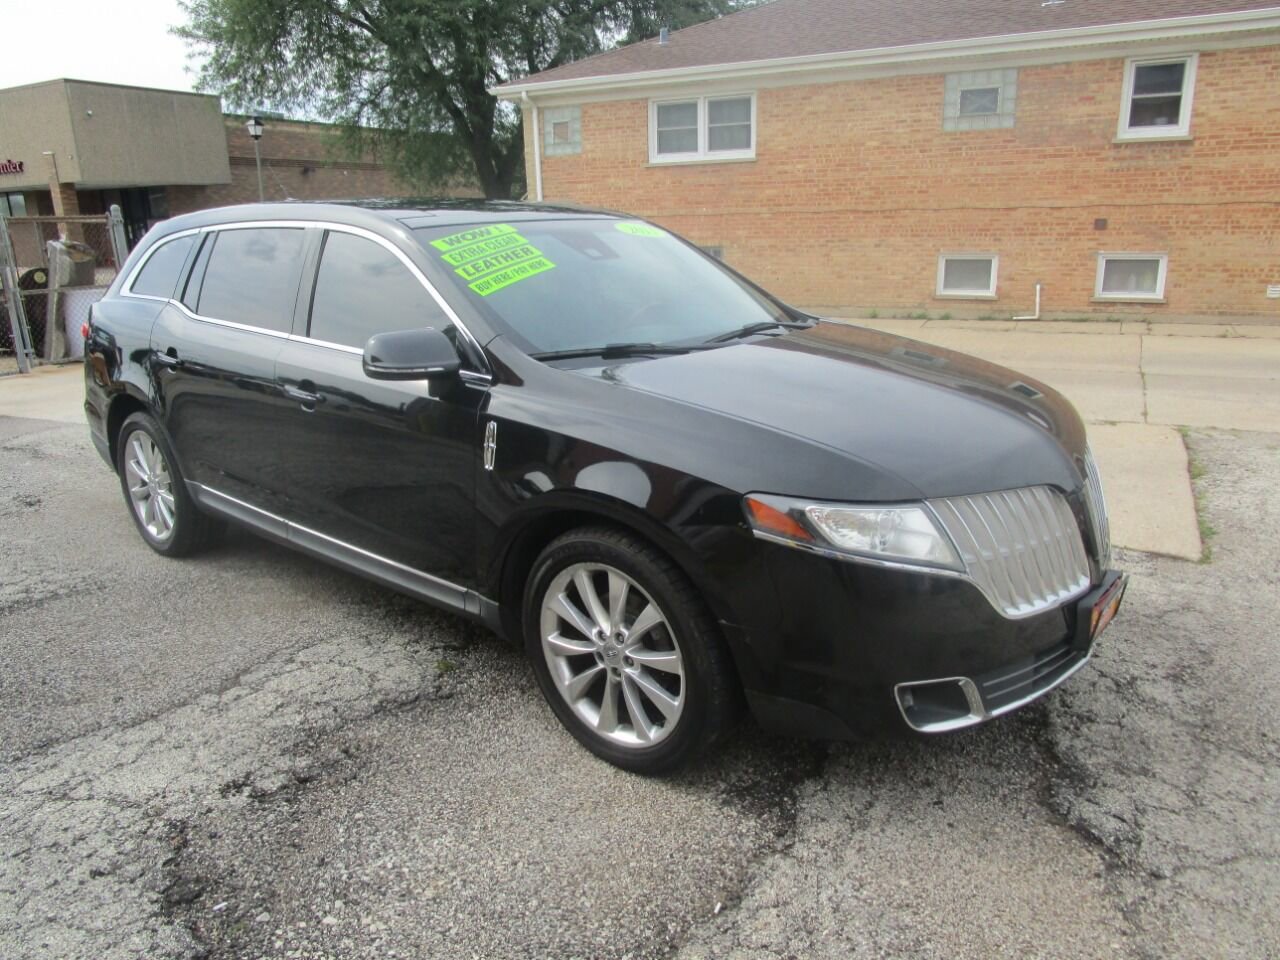 Used 2011 Lincoln MKT for Sale (Test Drive at Home) - Kelley Blue Book